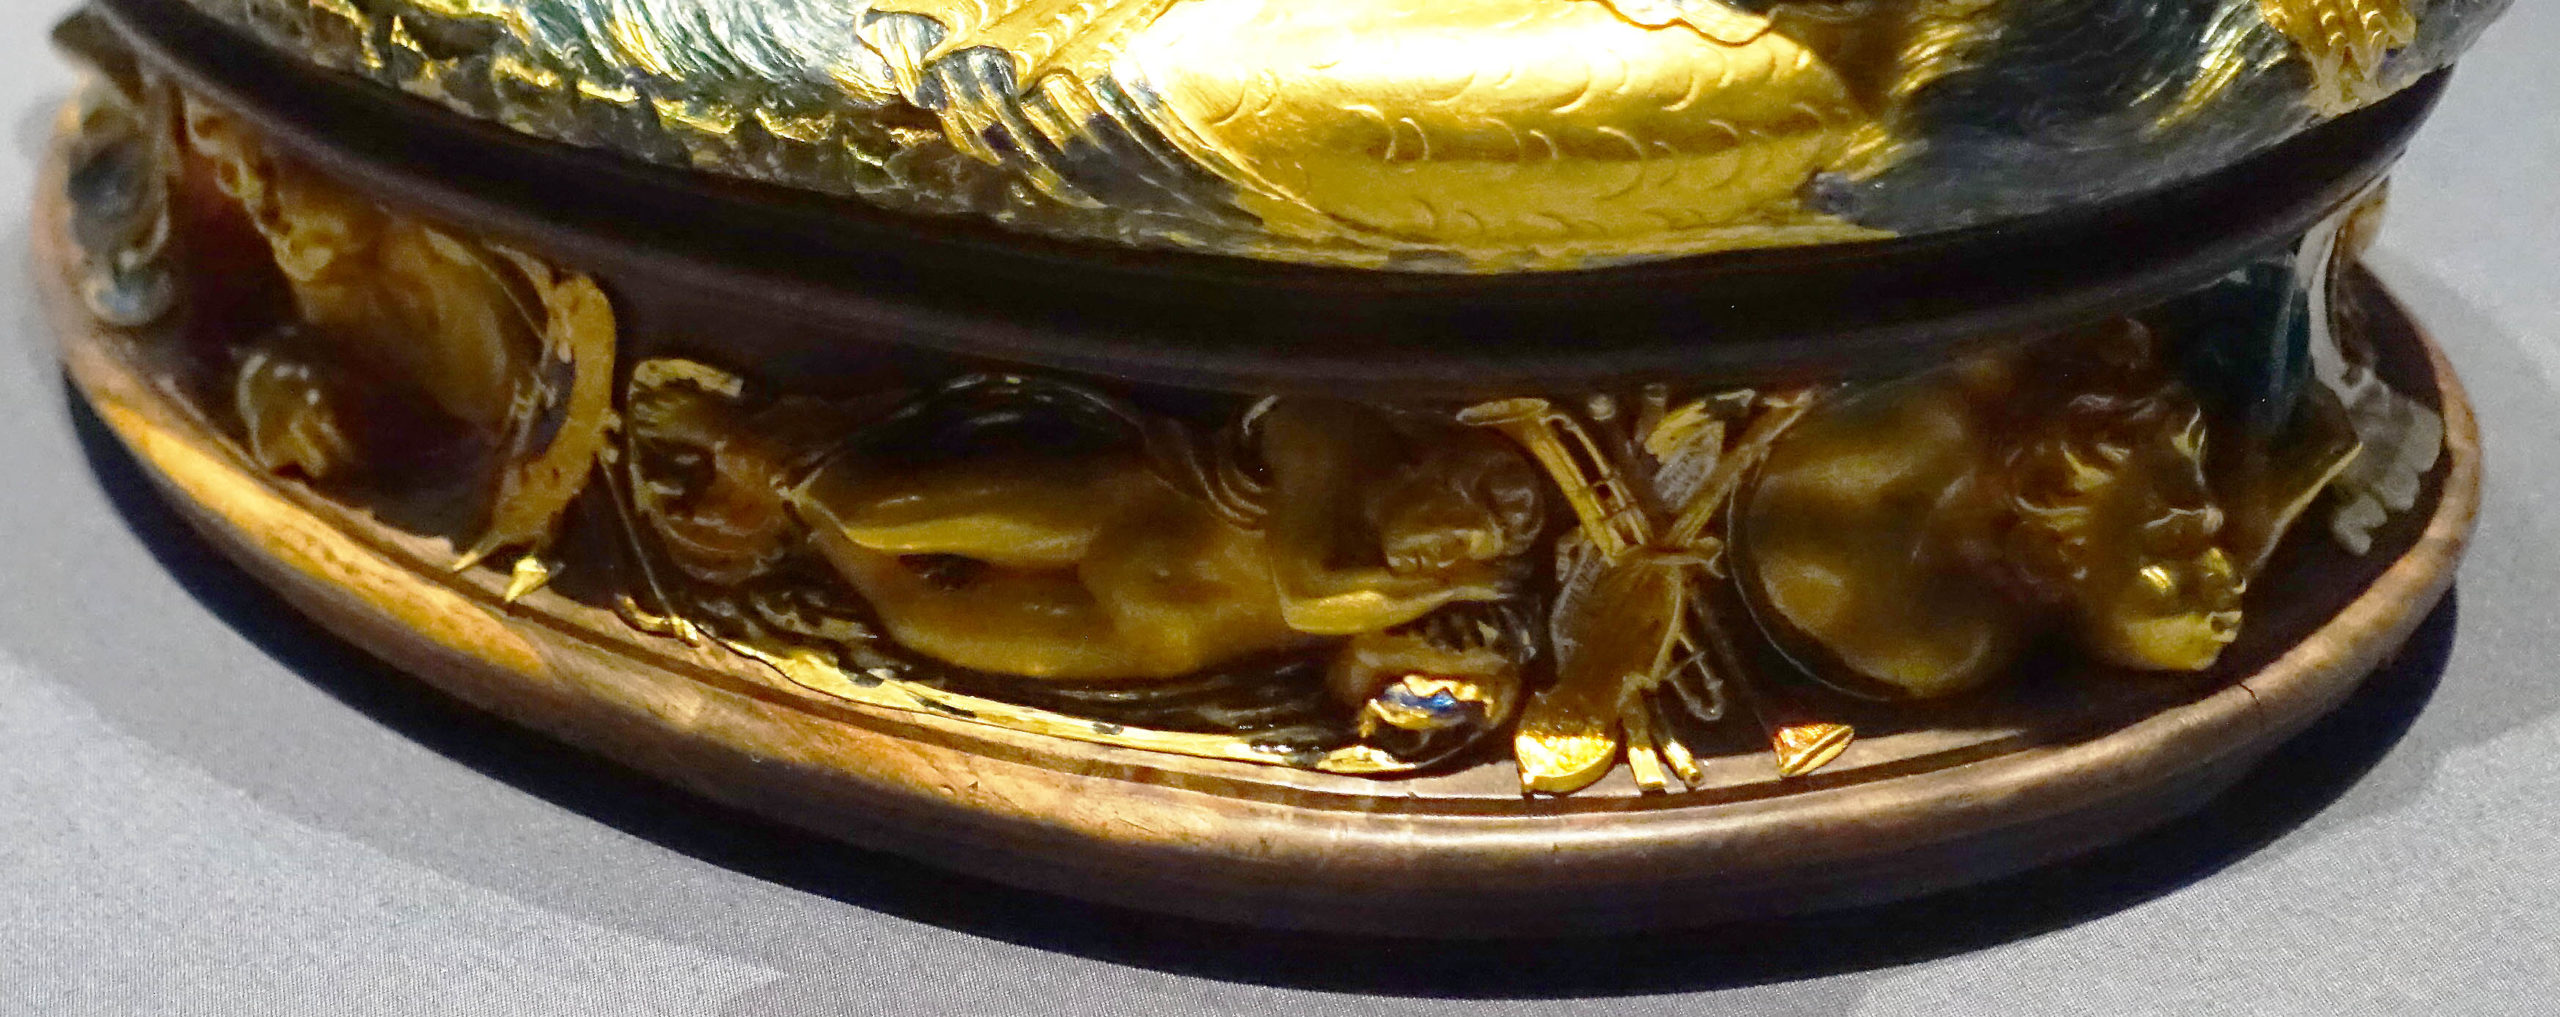 One of the four winds with puffed out cheeks on the base below the horses. Instruments are visible to the left of the personification of one of the winds. Benvenuto Cellini, Salt cellar, 1540-43, gold, enamel, ebony, and ivory, 28.5 x 21.5 x 26.3 cm (Kunsthistorisches Museum, Vienna; photo: Steven Zucker, CC BY-NC-SA 2.0)